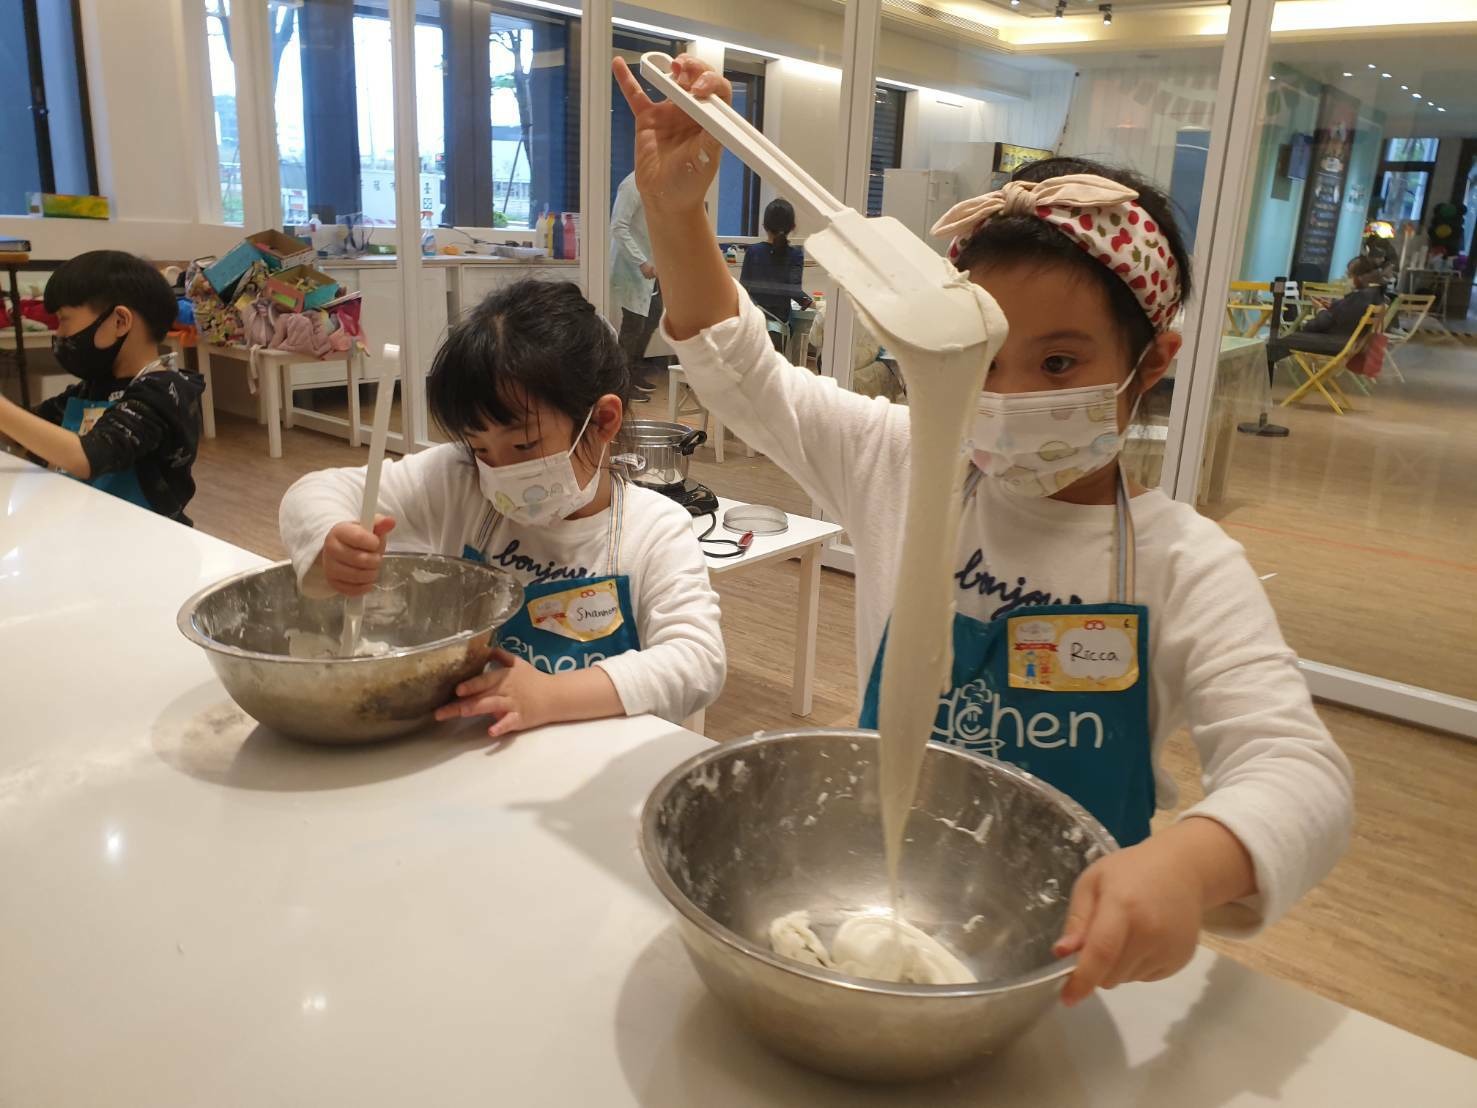 Teaching English and Living in Taiwan Jobs Available 教學工作, Kidchen Club (樺丰國際有限公司) Up to NT$800 / hour!  FLEXIBLE Schedules! Teach COOKING and Science Classes!  image